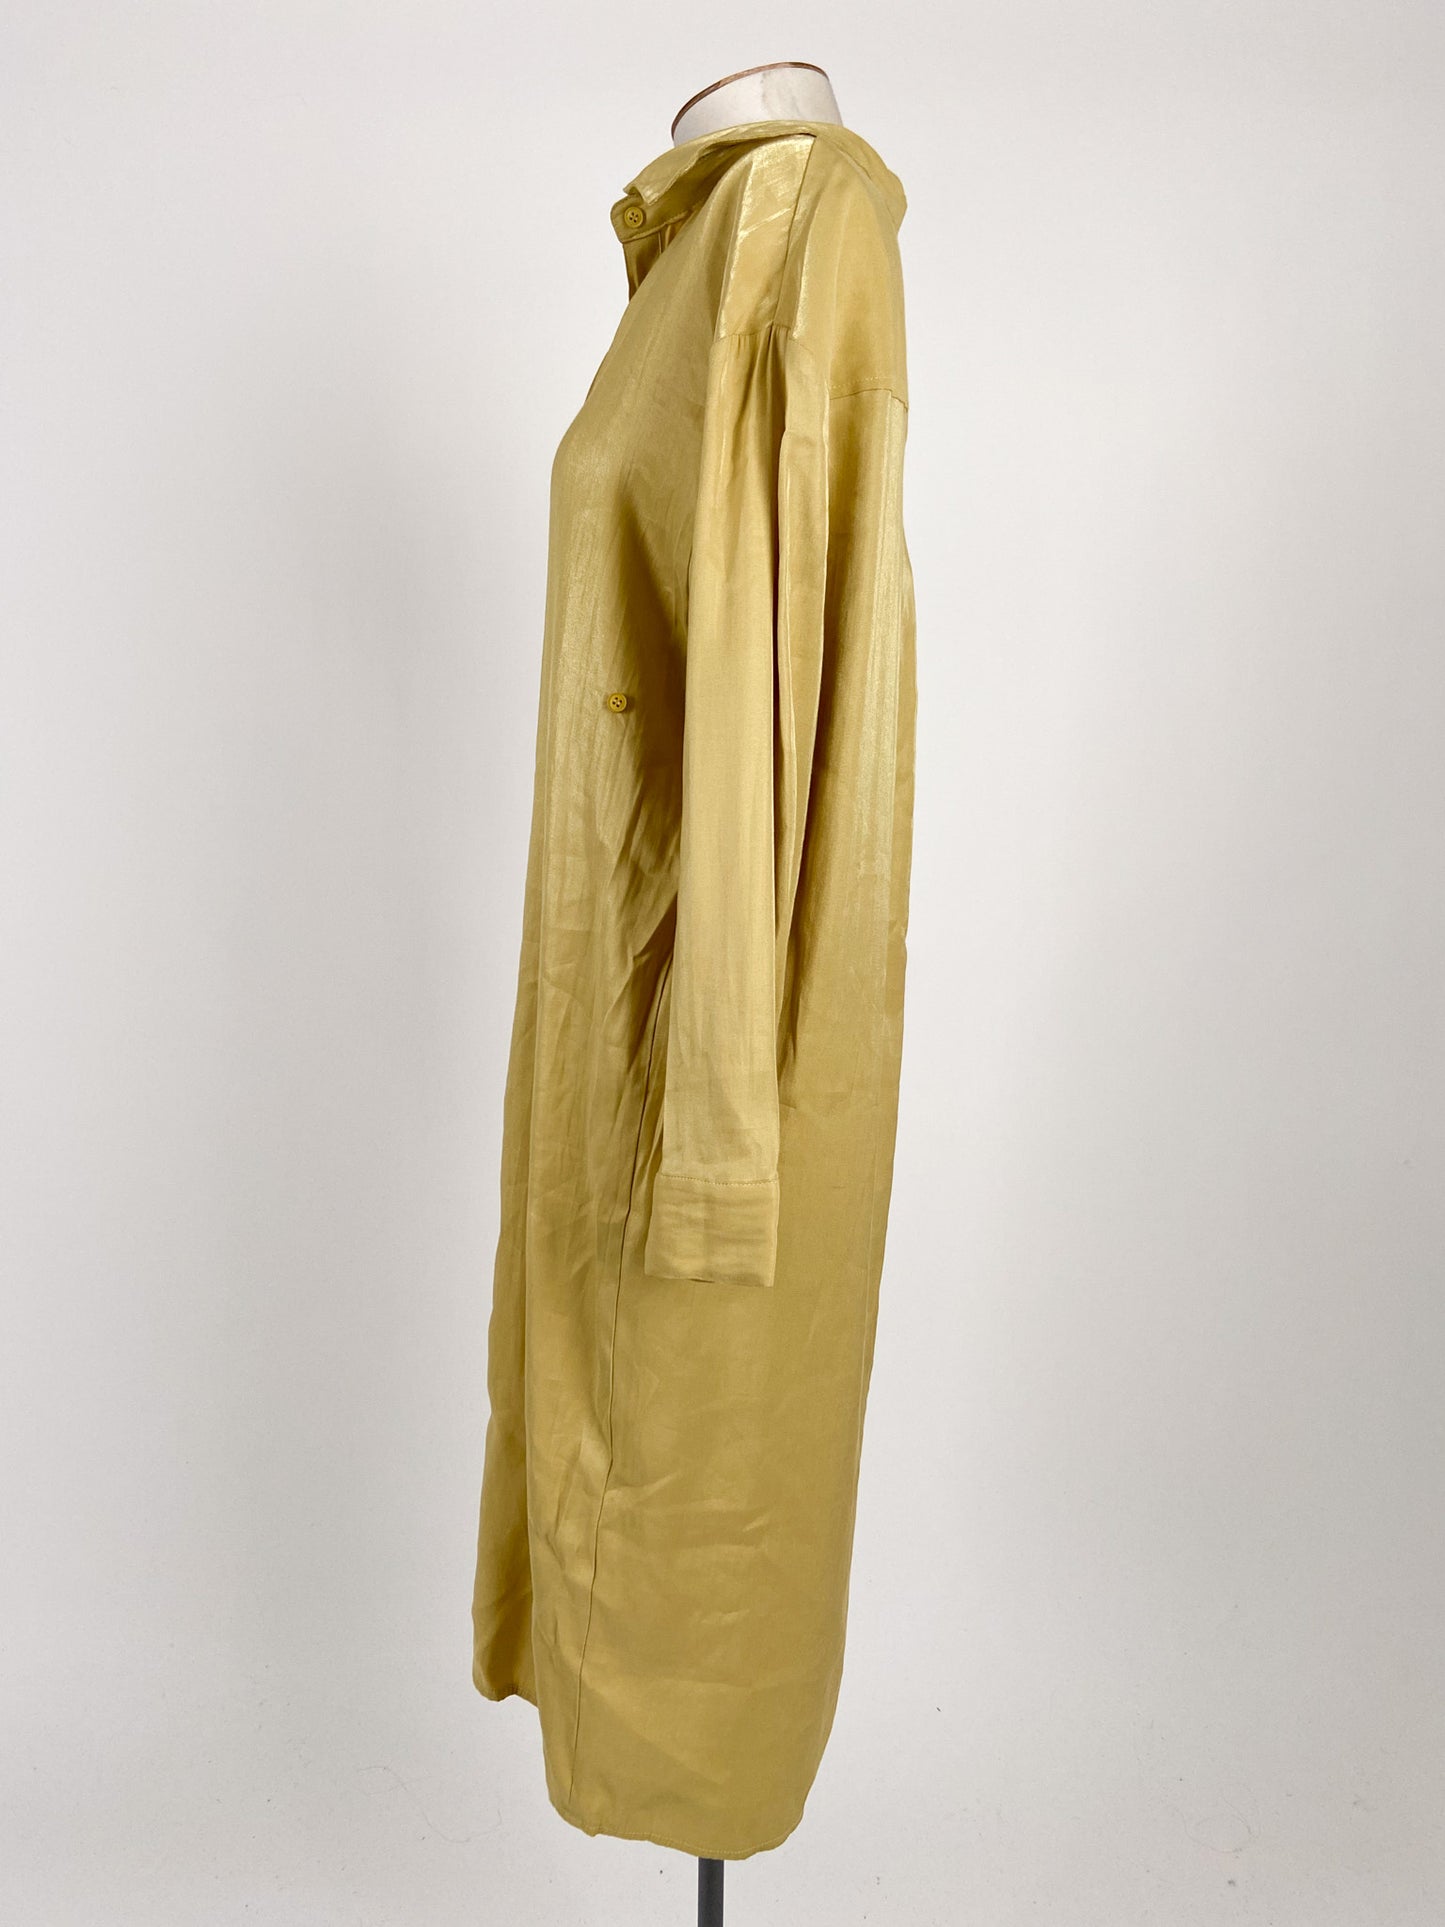 Amin Style | Yellow Casual/Workwear Dress | Size S